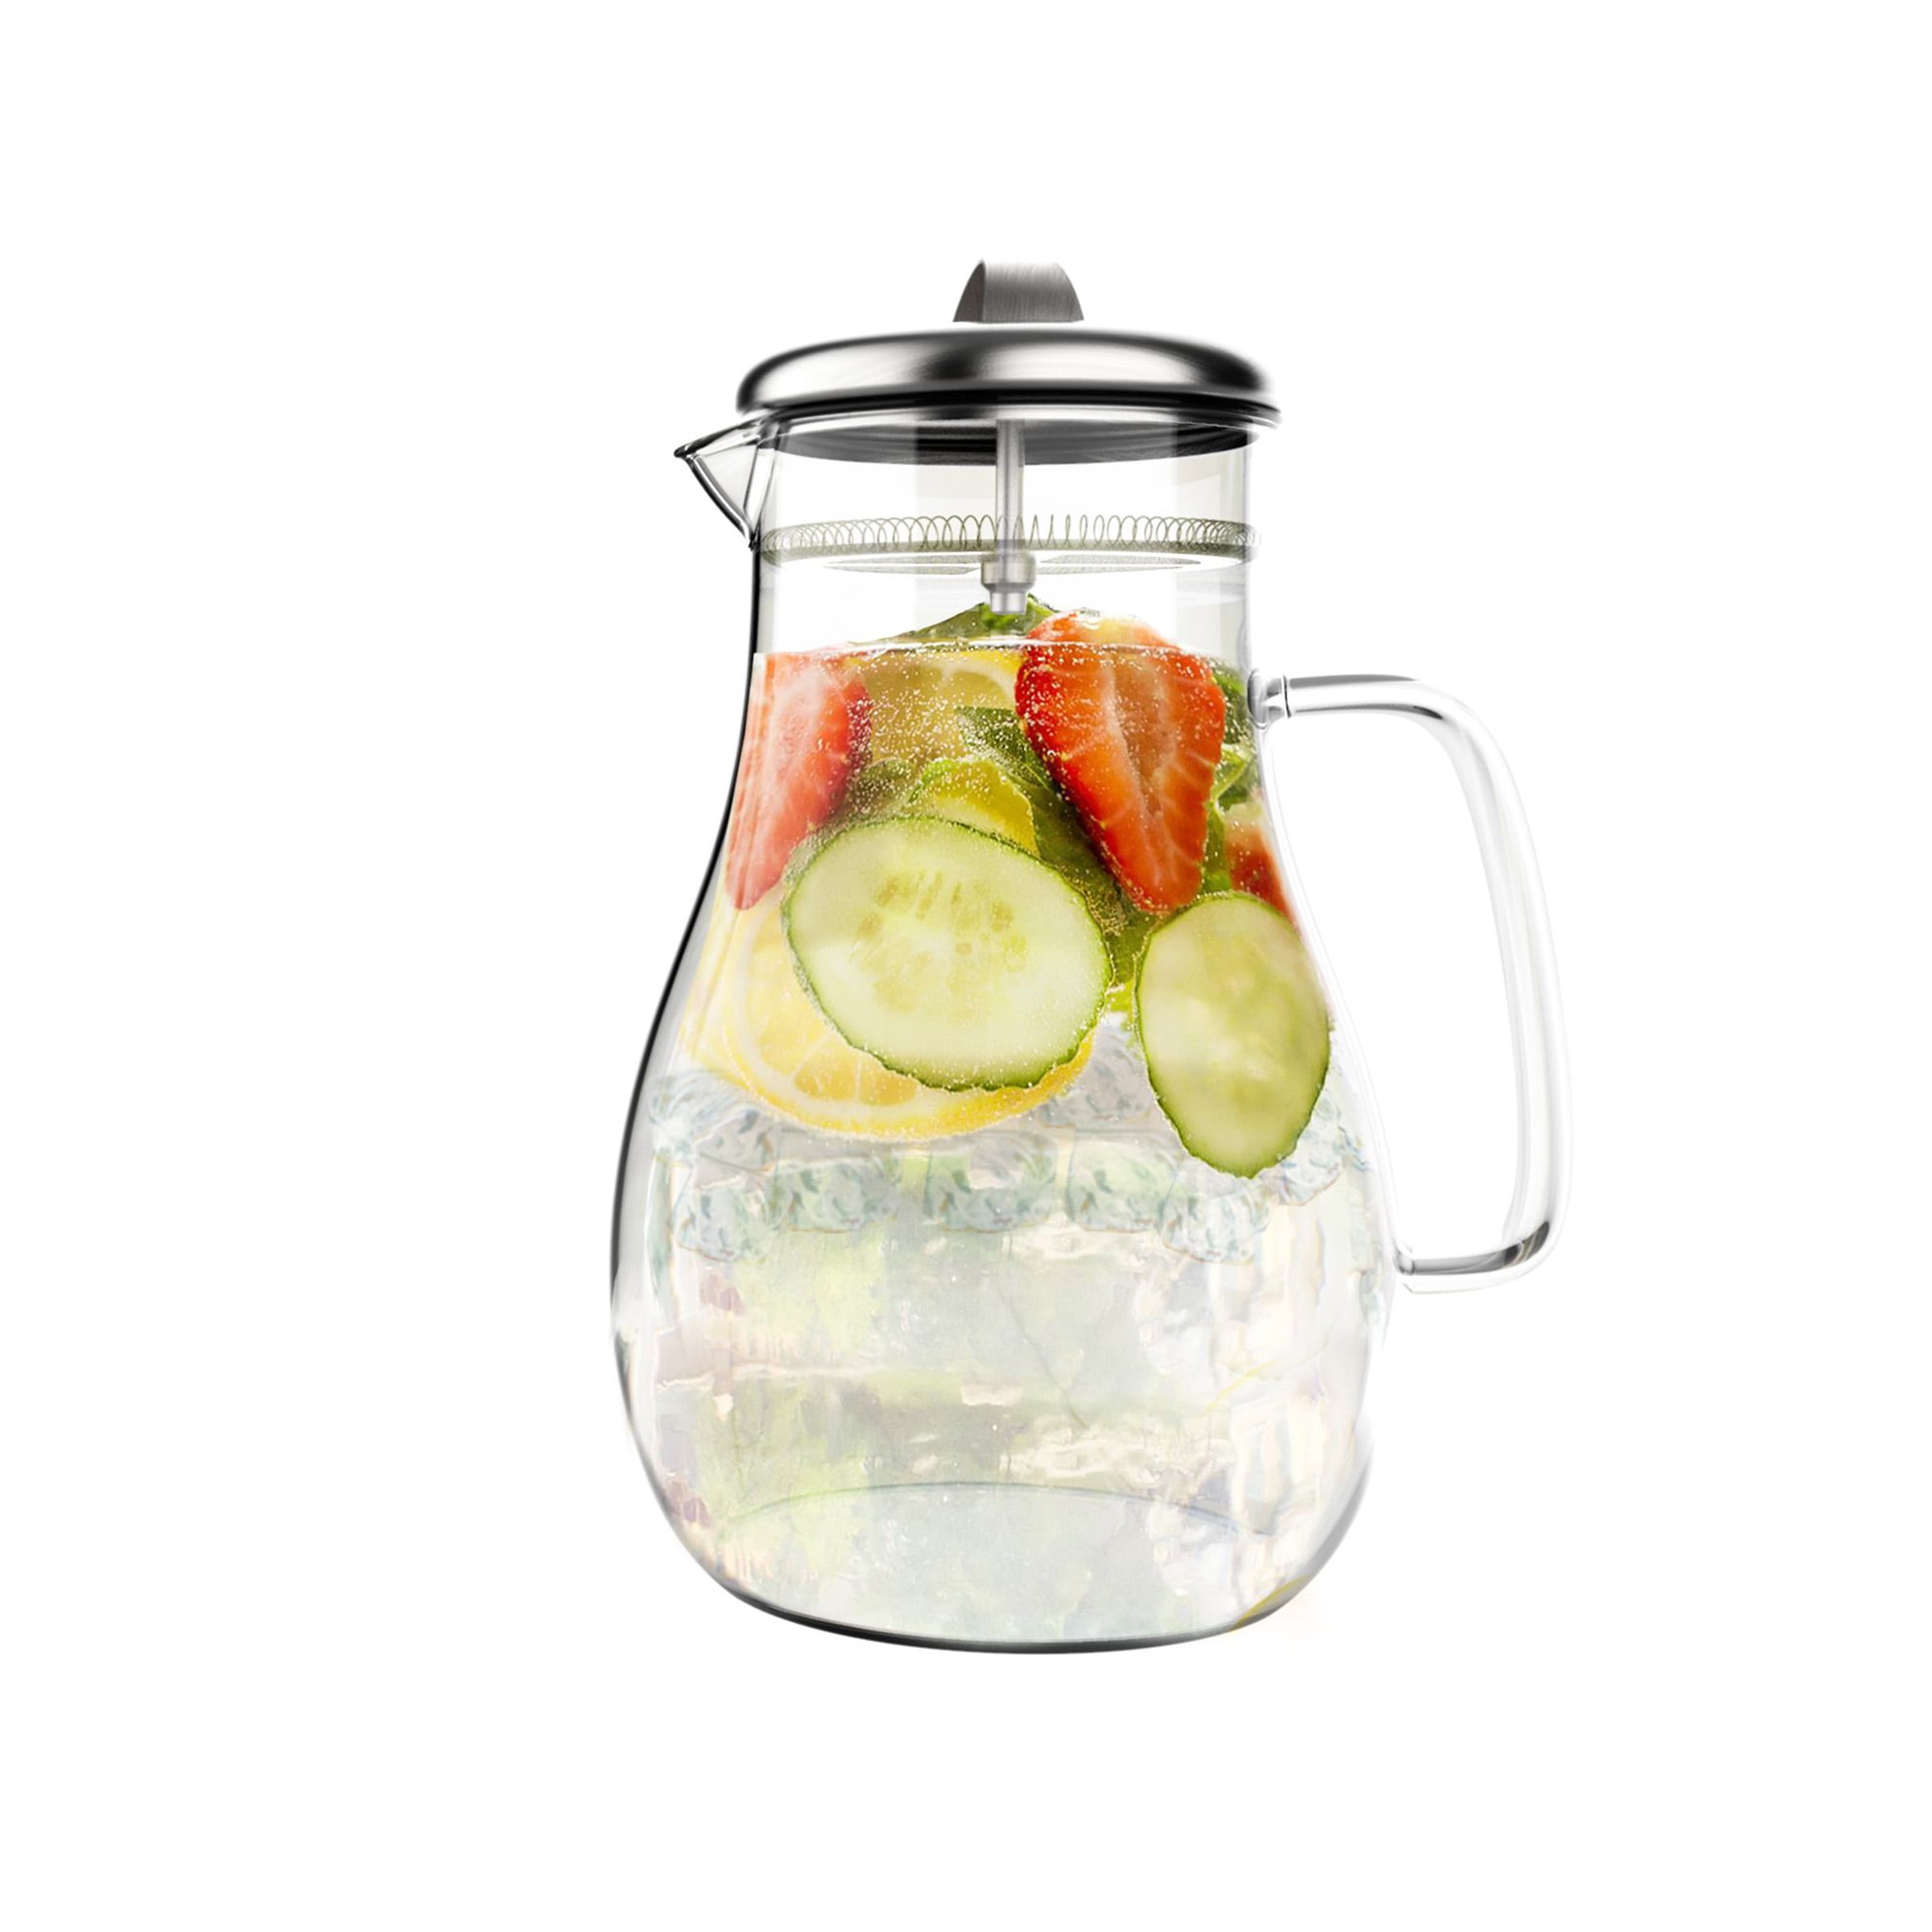 Heat Proof Glass Pitcher w/ Stainless Lid for Hot & Cold Beverages 